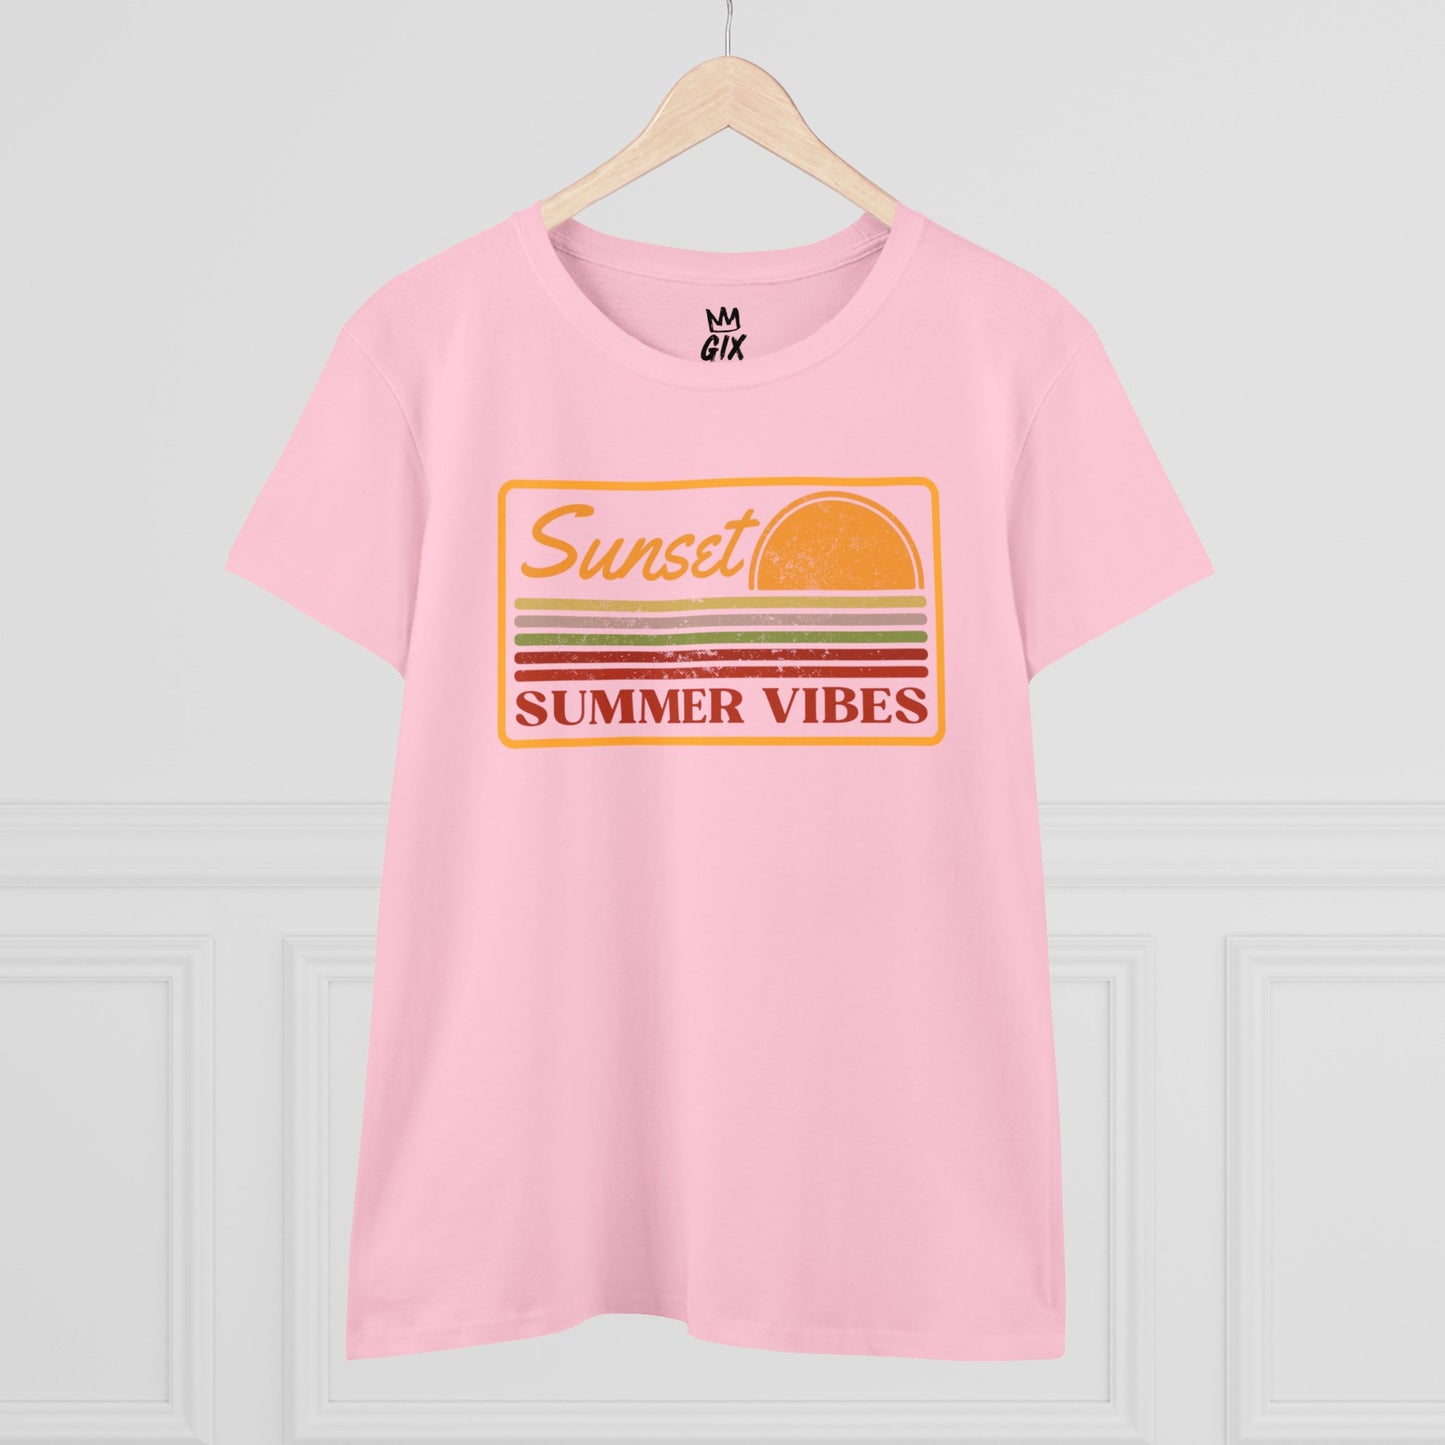 Summer Vibes Women's Beach T-Shirt - 100% Cotton, Semi-Fitted, Soft and Comfy